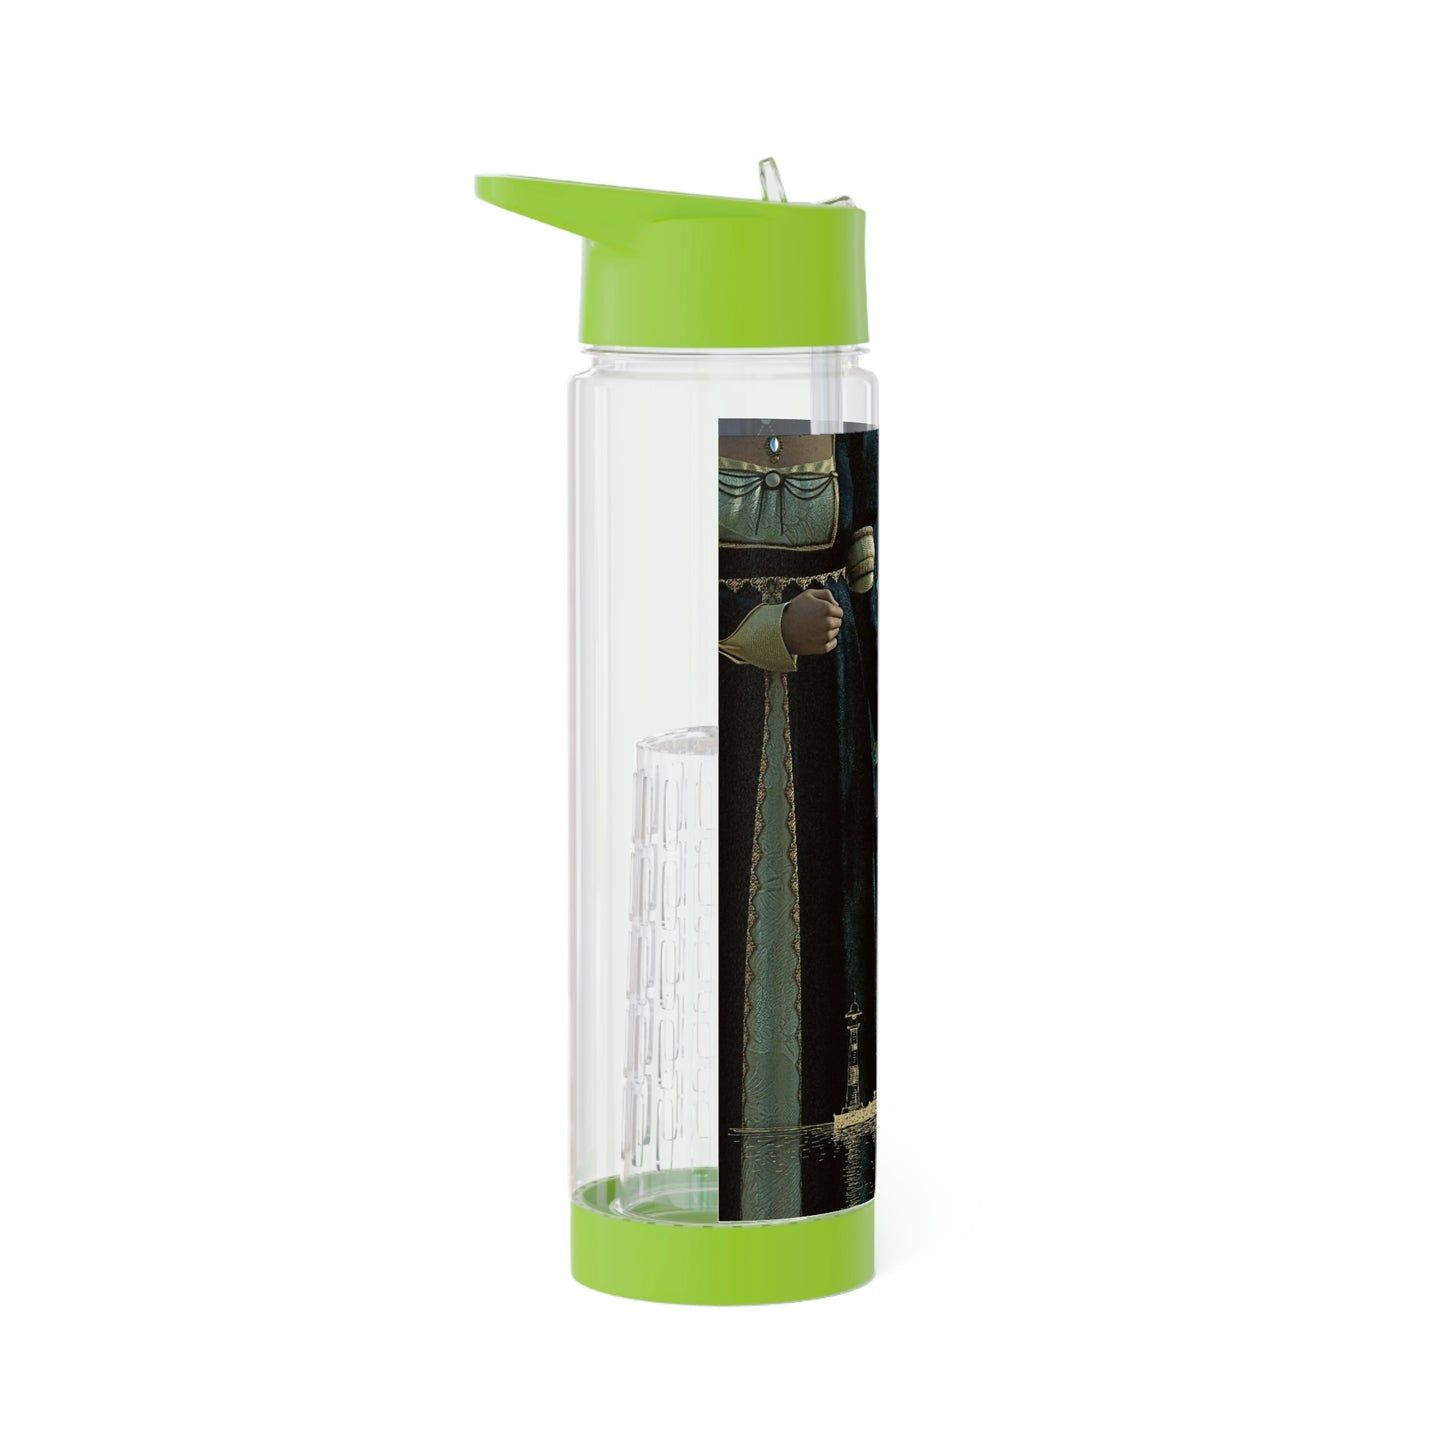 Our Little Life - Infuser Water Bottle